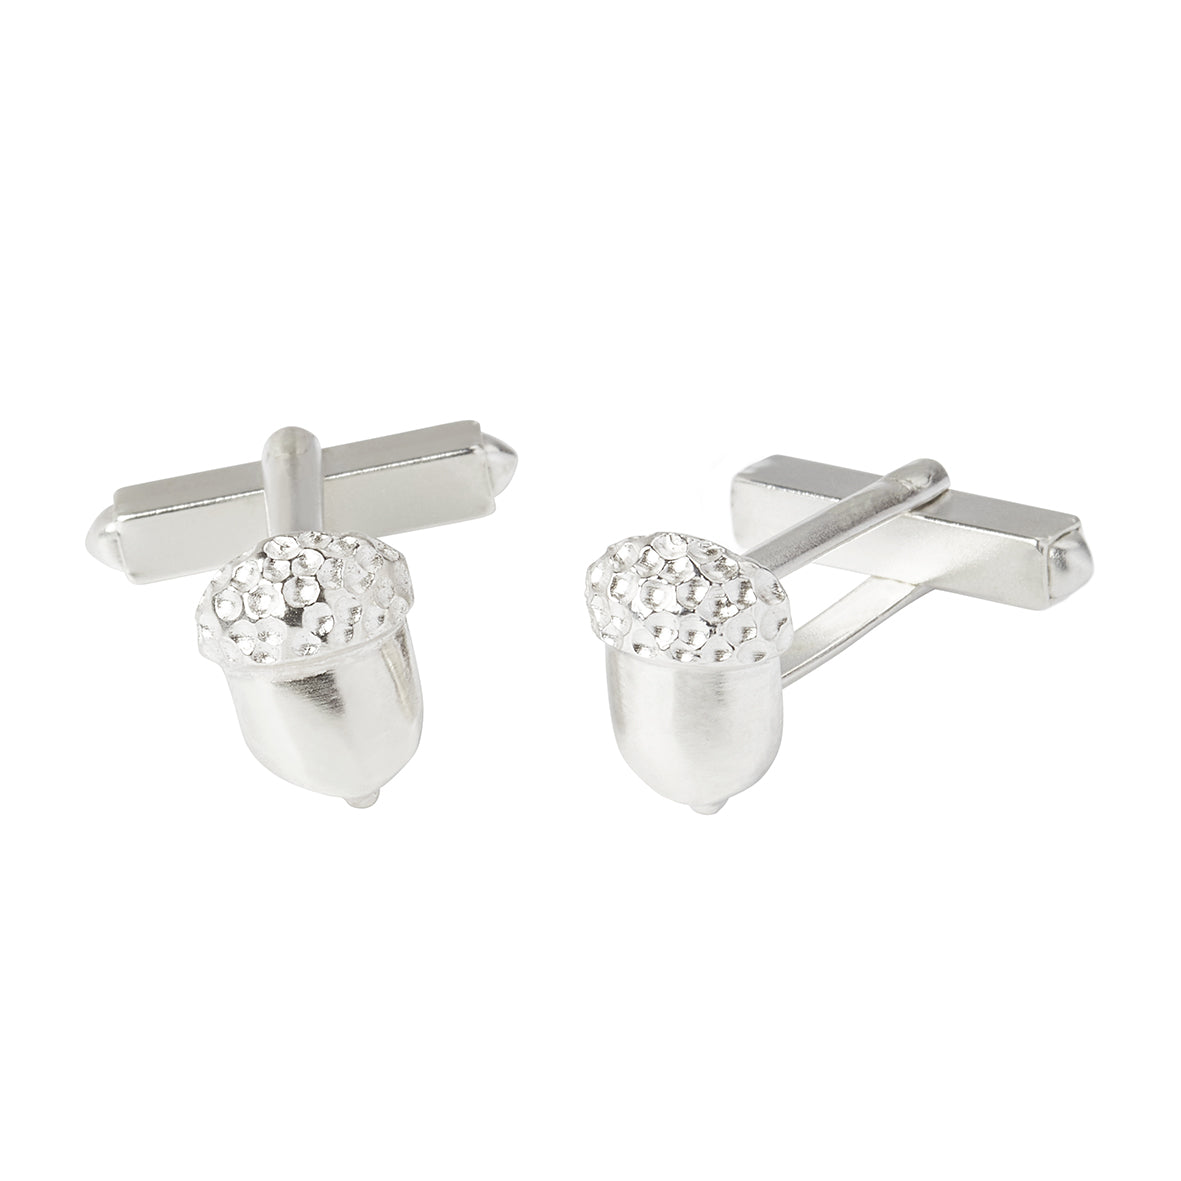 A pair of sterling silver half acorn cufflinks with solid silver swivel cufflink backs on a white background. Handmade in Corbridge Northumberland by Kirsty Taylor Jewellery